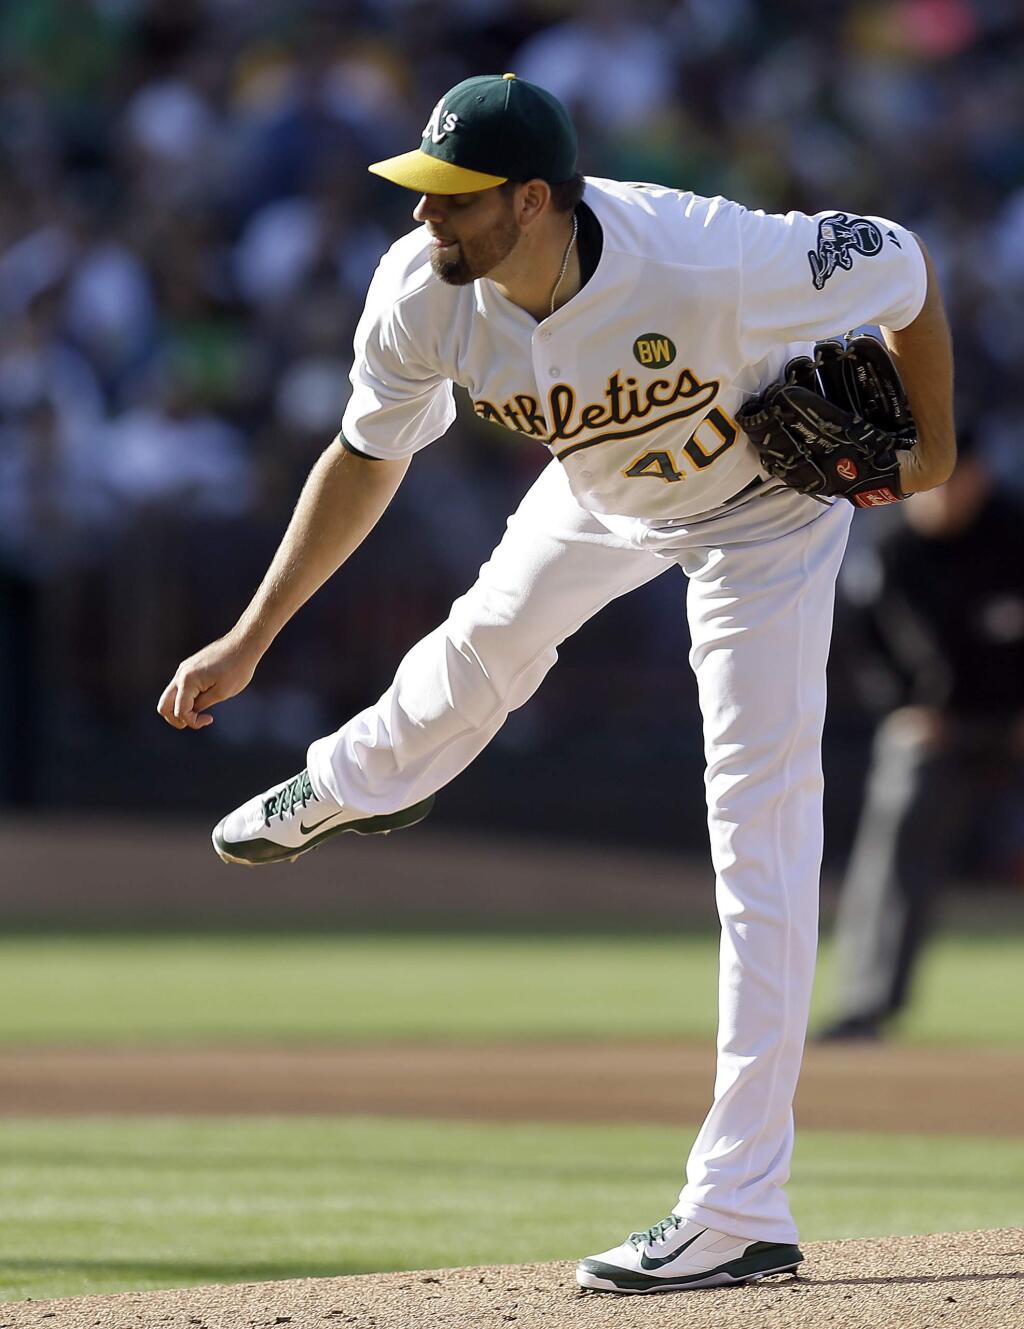 A's starter Jason Hammel works against the Baltimore Orioles in the first inning of Saturday's game in Oakland. (Ben Margot/Associated Press)